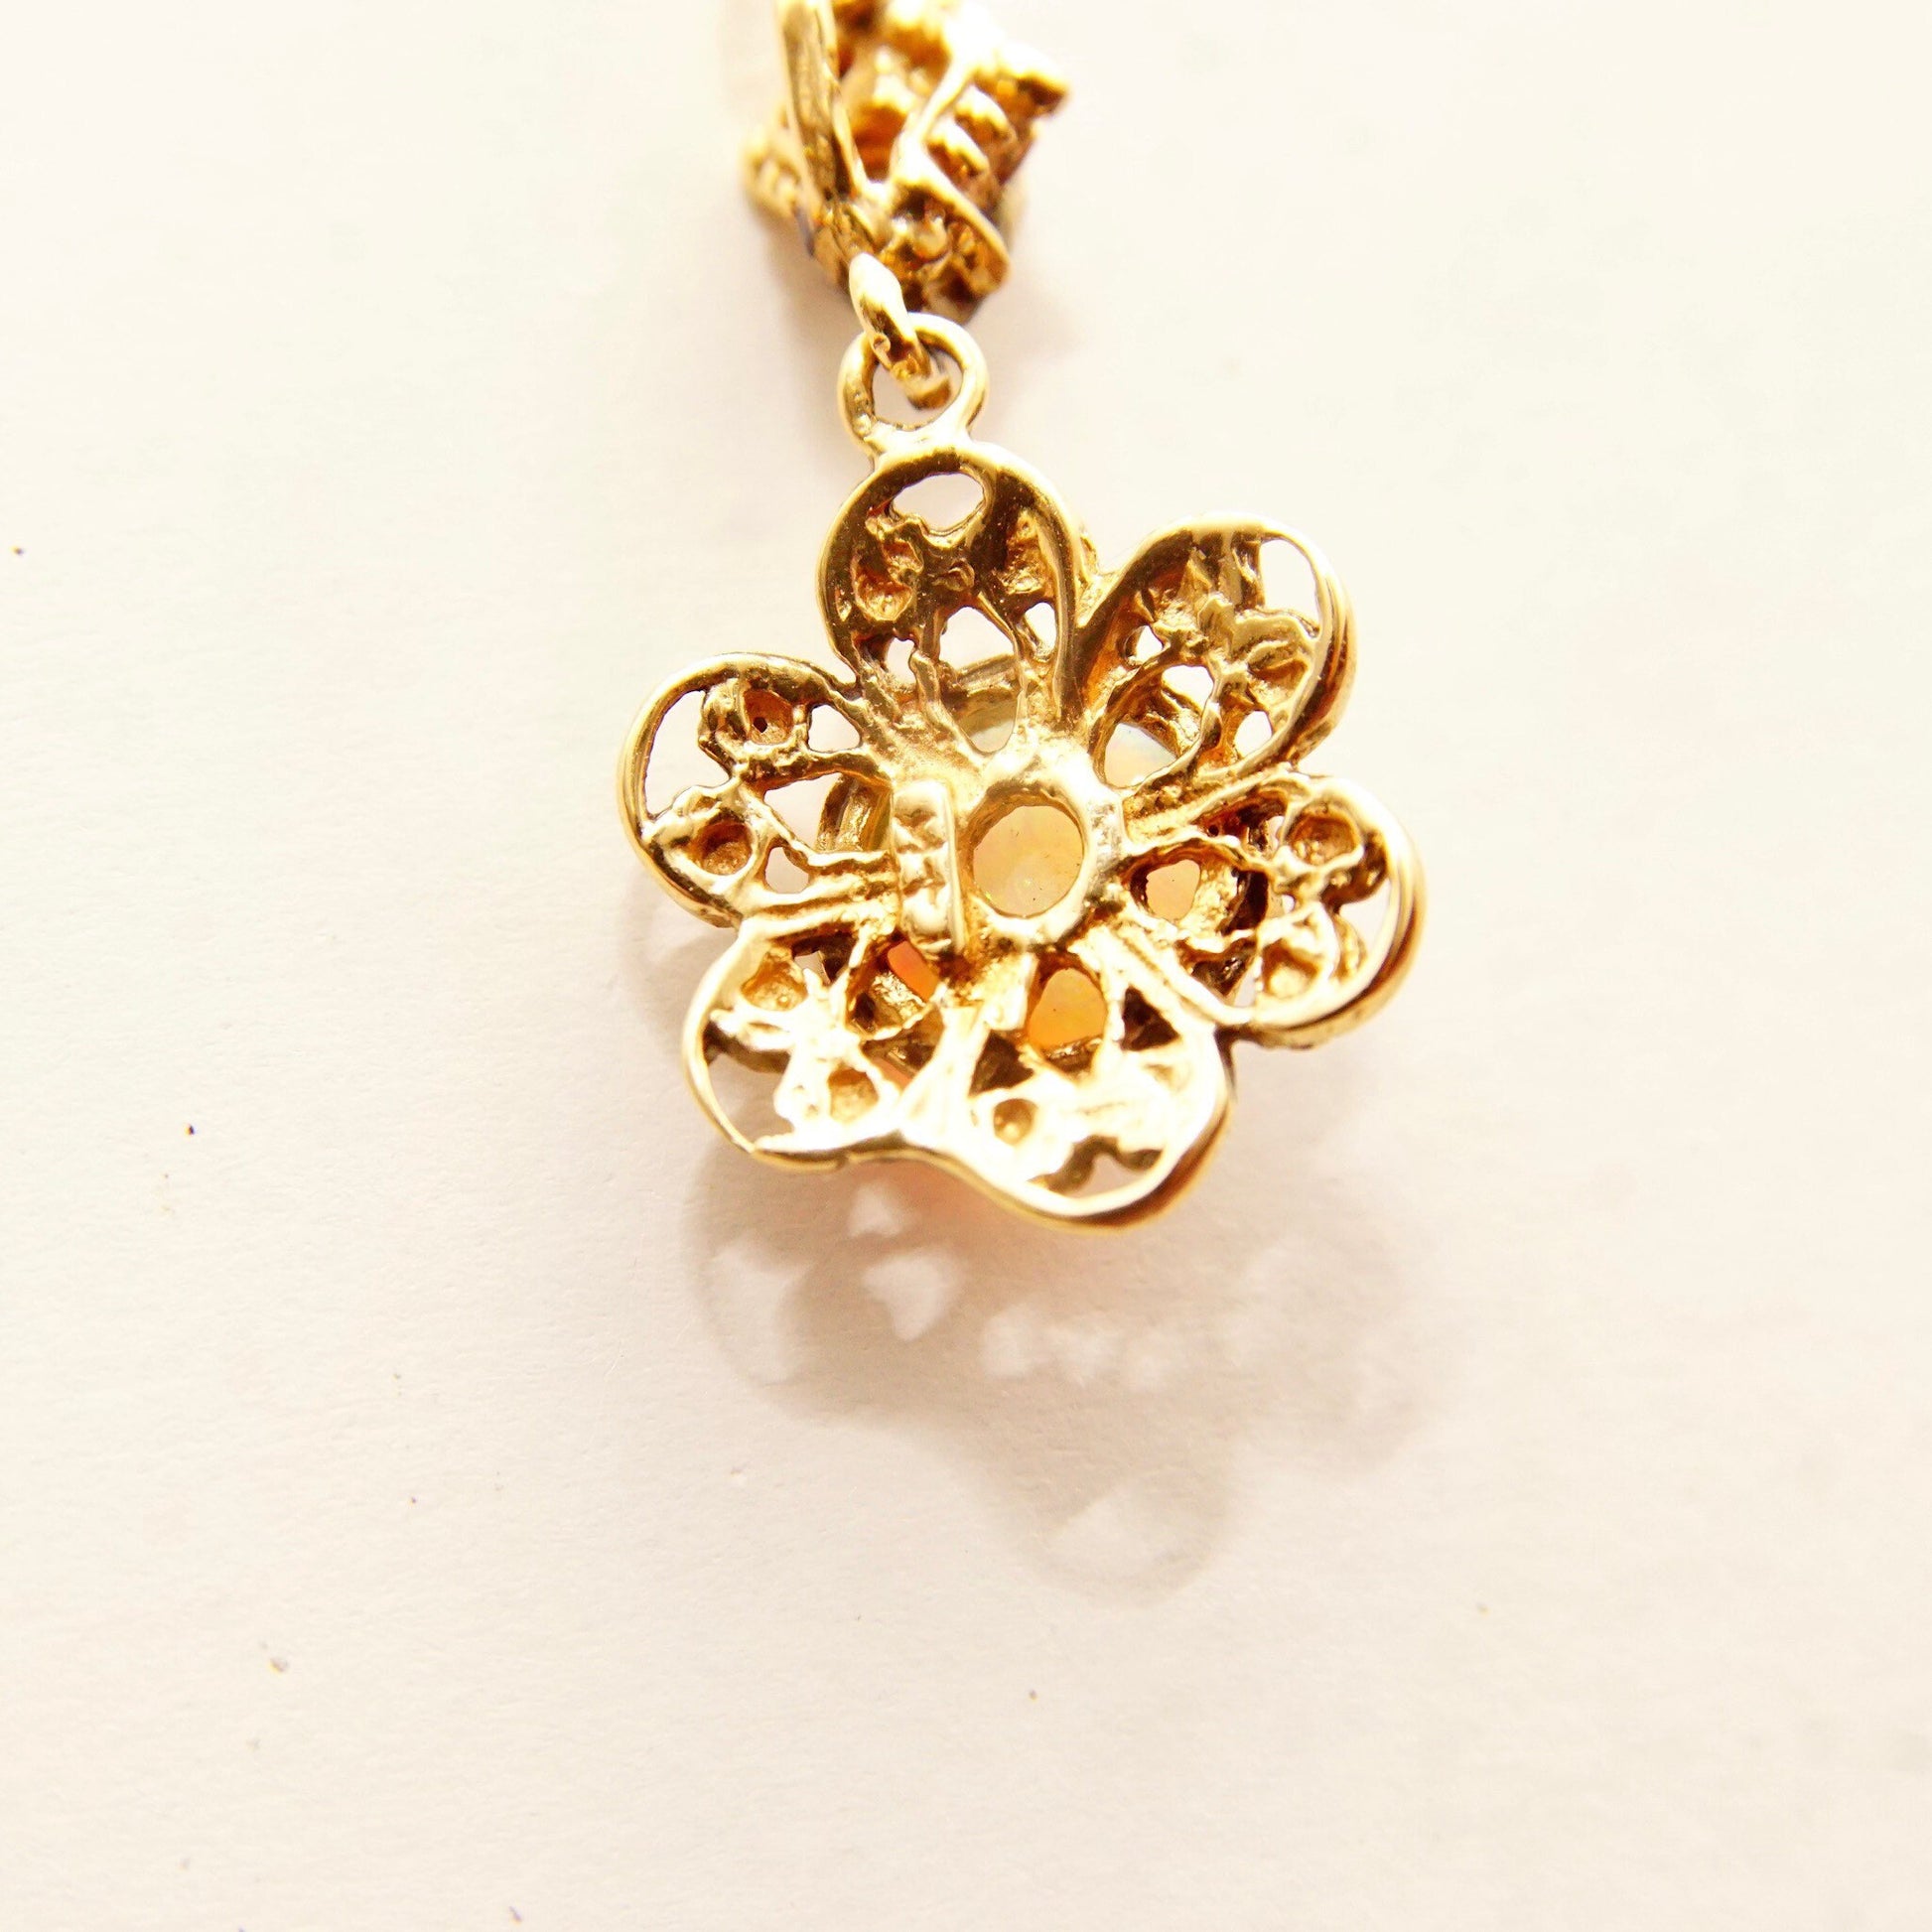 14K gold filigree flower pendant necklace with opal gemstone cabochon center and diamond accents on bail, featuring delicate 1.5mm loose rope chain, 21 inches long.